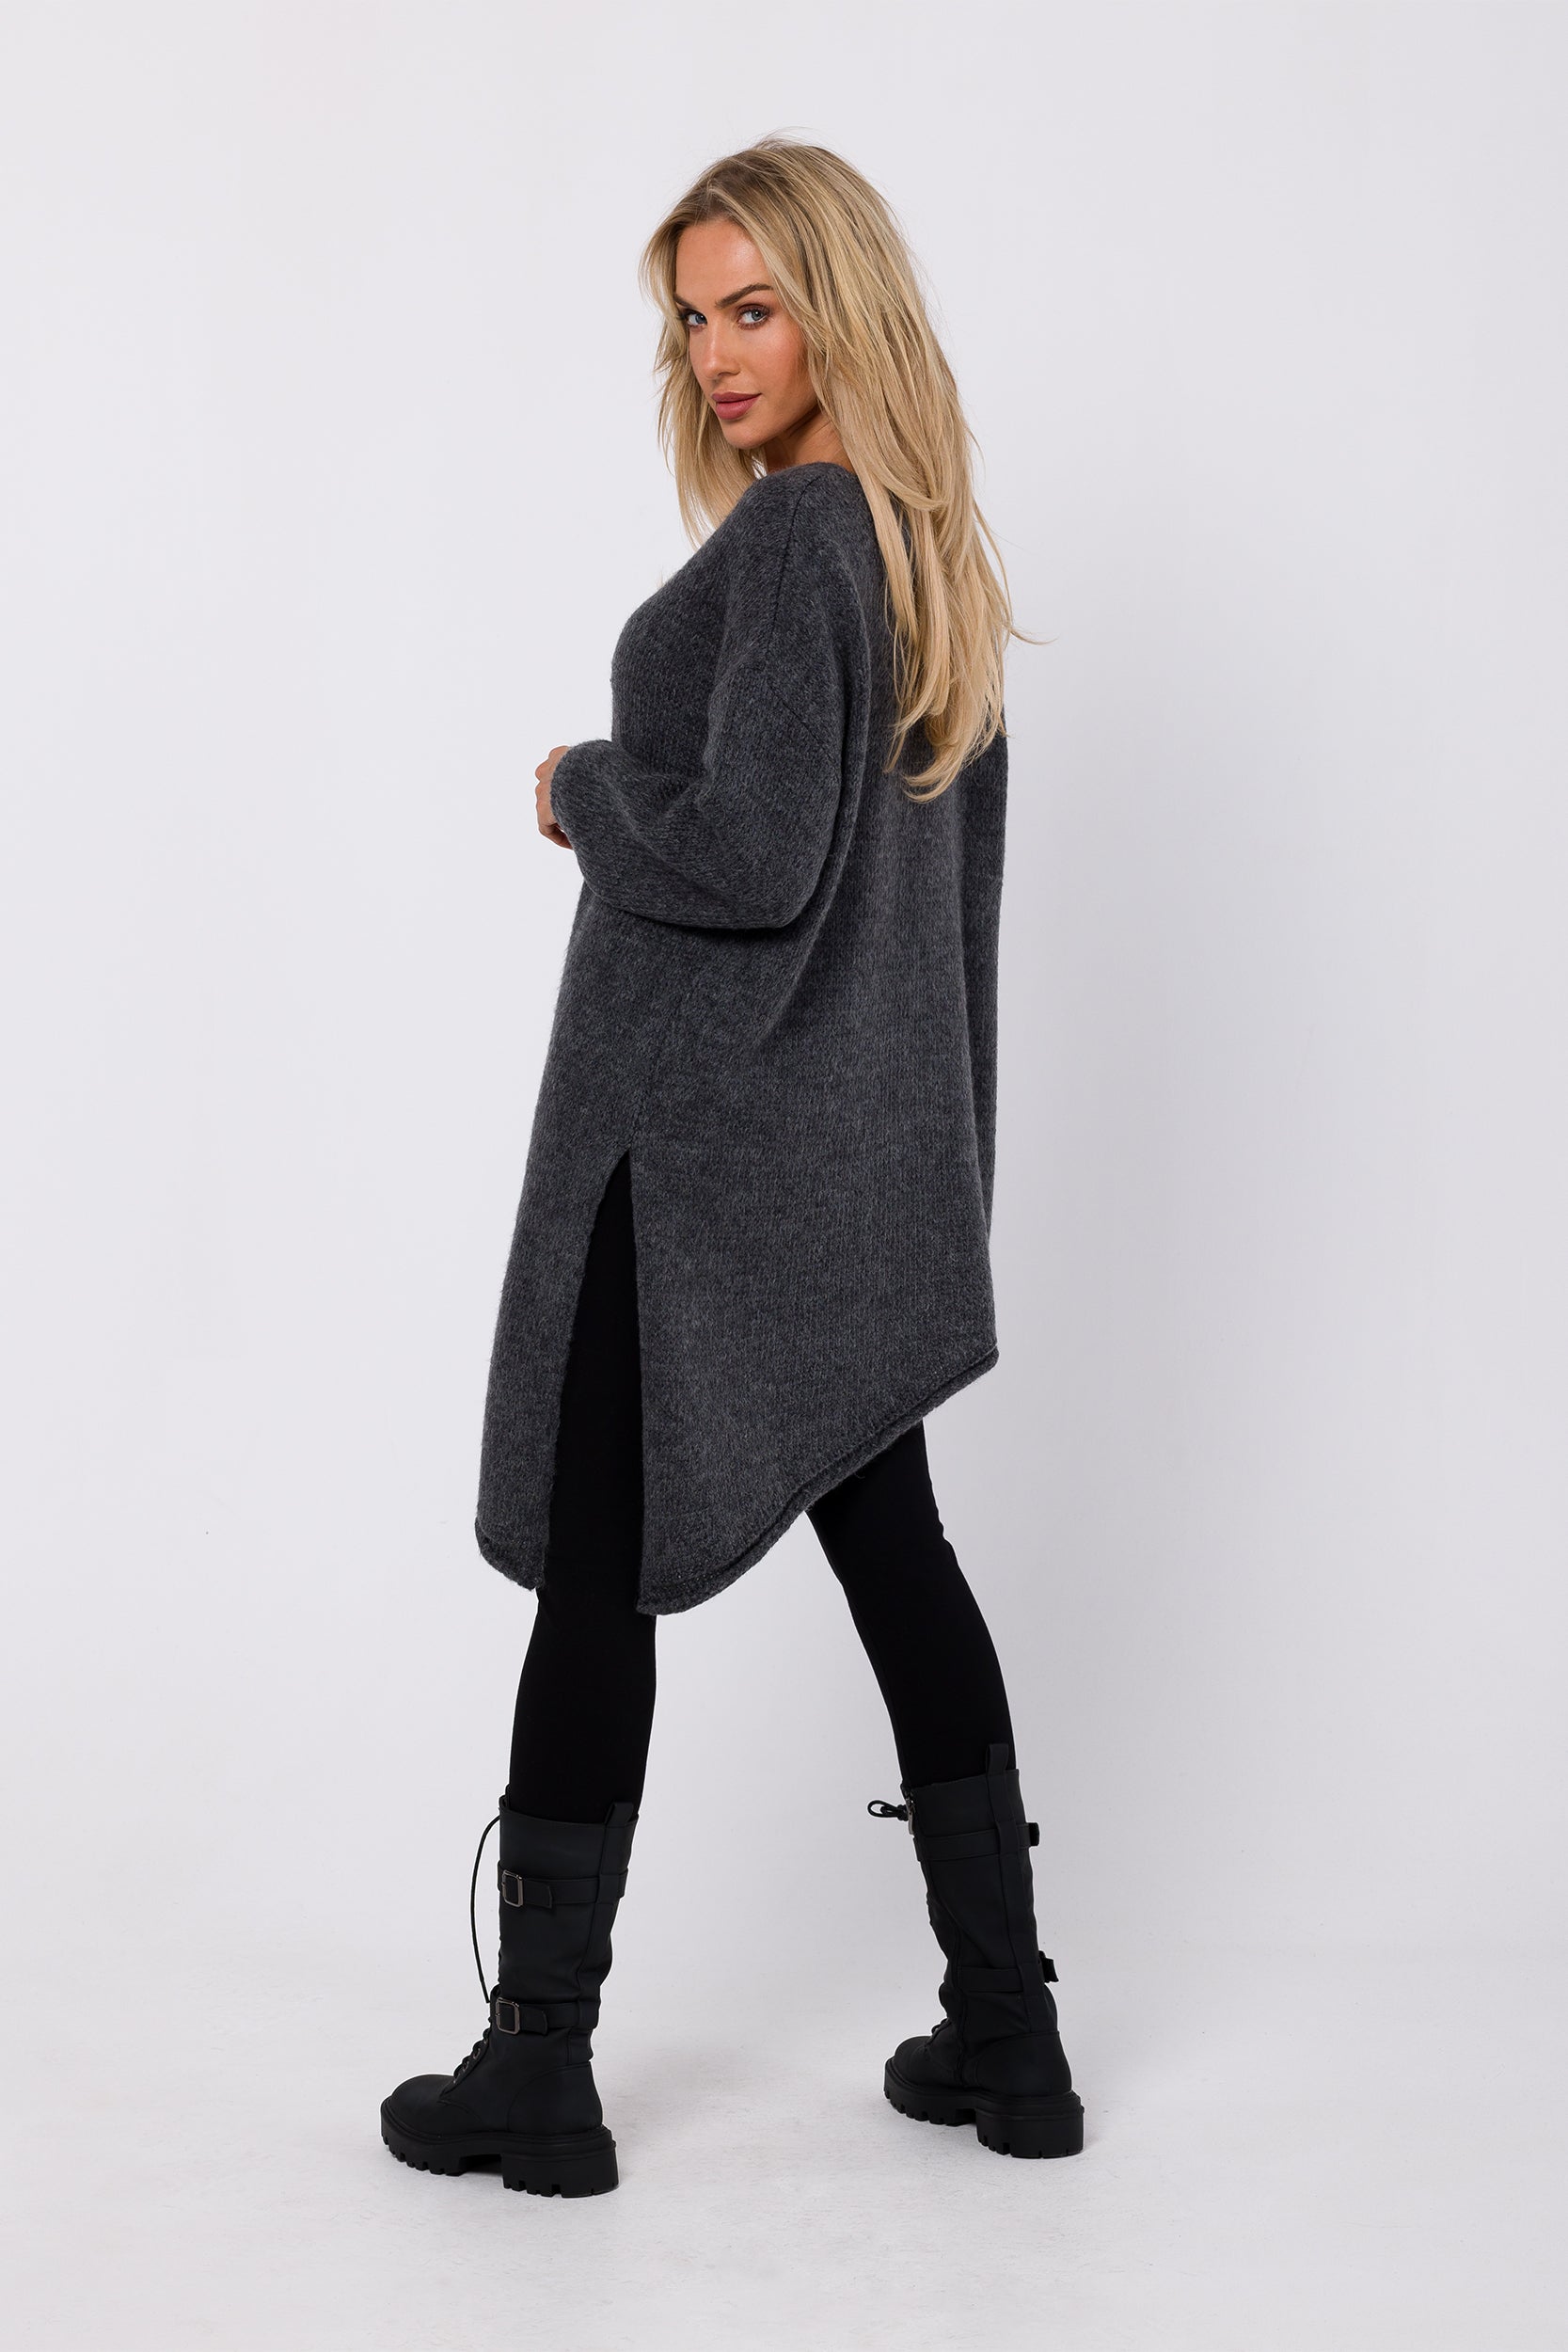 Experience the perfect blend of comfort and style with our Relaxed Fit Sweater Asymmetric. Crafted from an open chunky knit, it boasts a relaxed fit with an asymmetric bottom hem and side split for modern flair. The long sleeves and deep V-shaped neckline add warmth and allure. This versatile piece can be worn as a classic pullover or transformed into a one-shoulder statement, making it a must-have for your winter wardrobe.